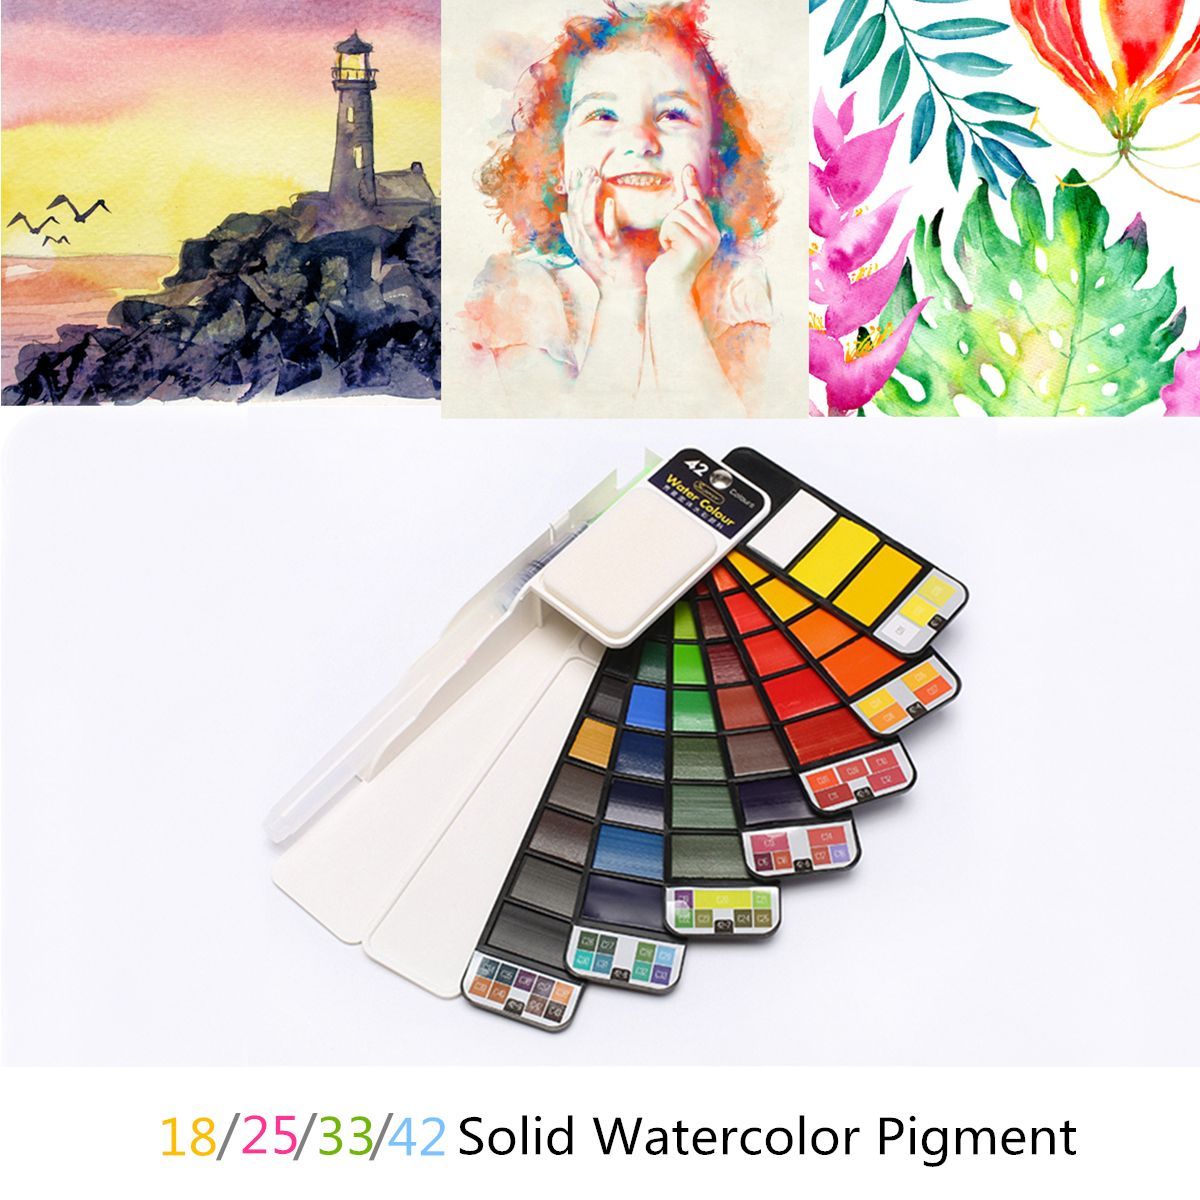 18253342-Acrylic-Paint-Portable-Solid-Watercolor-Pigment-Paint-Set-w-Water-Brush-1449161